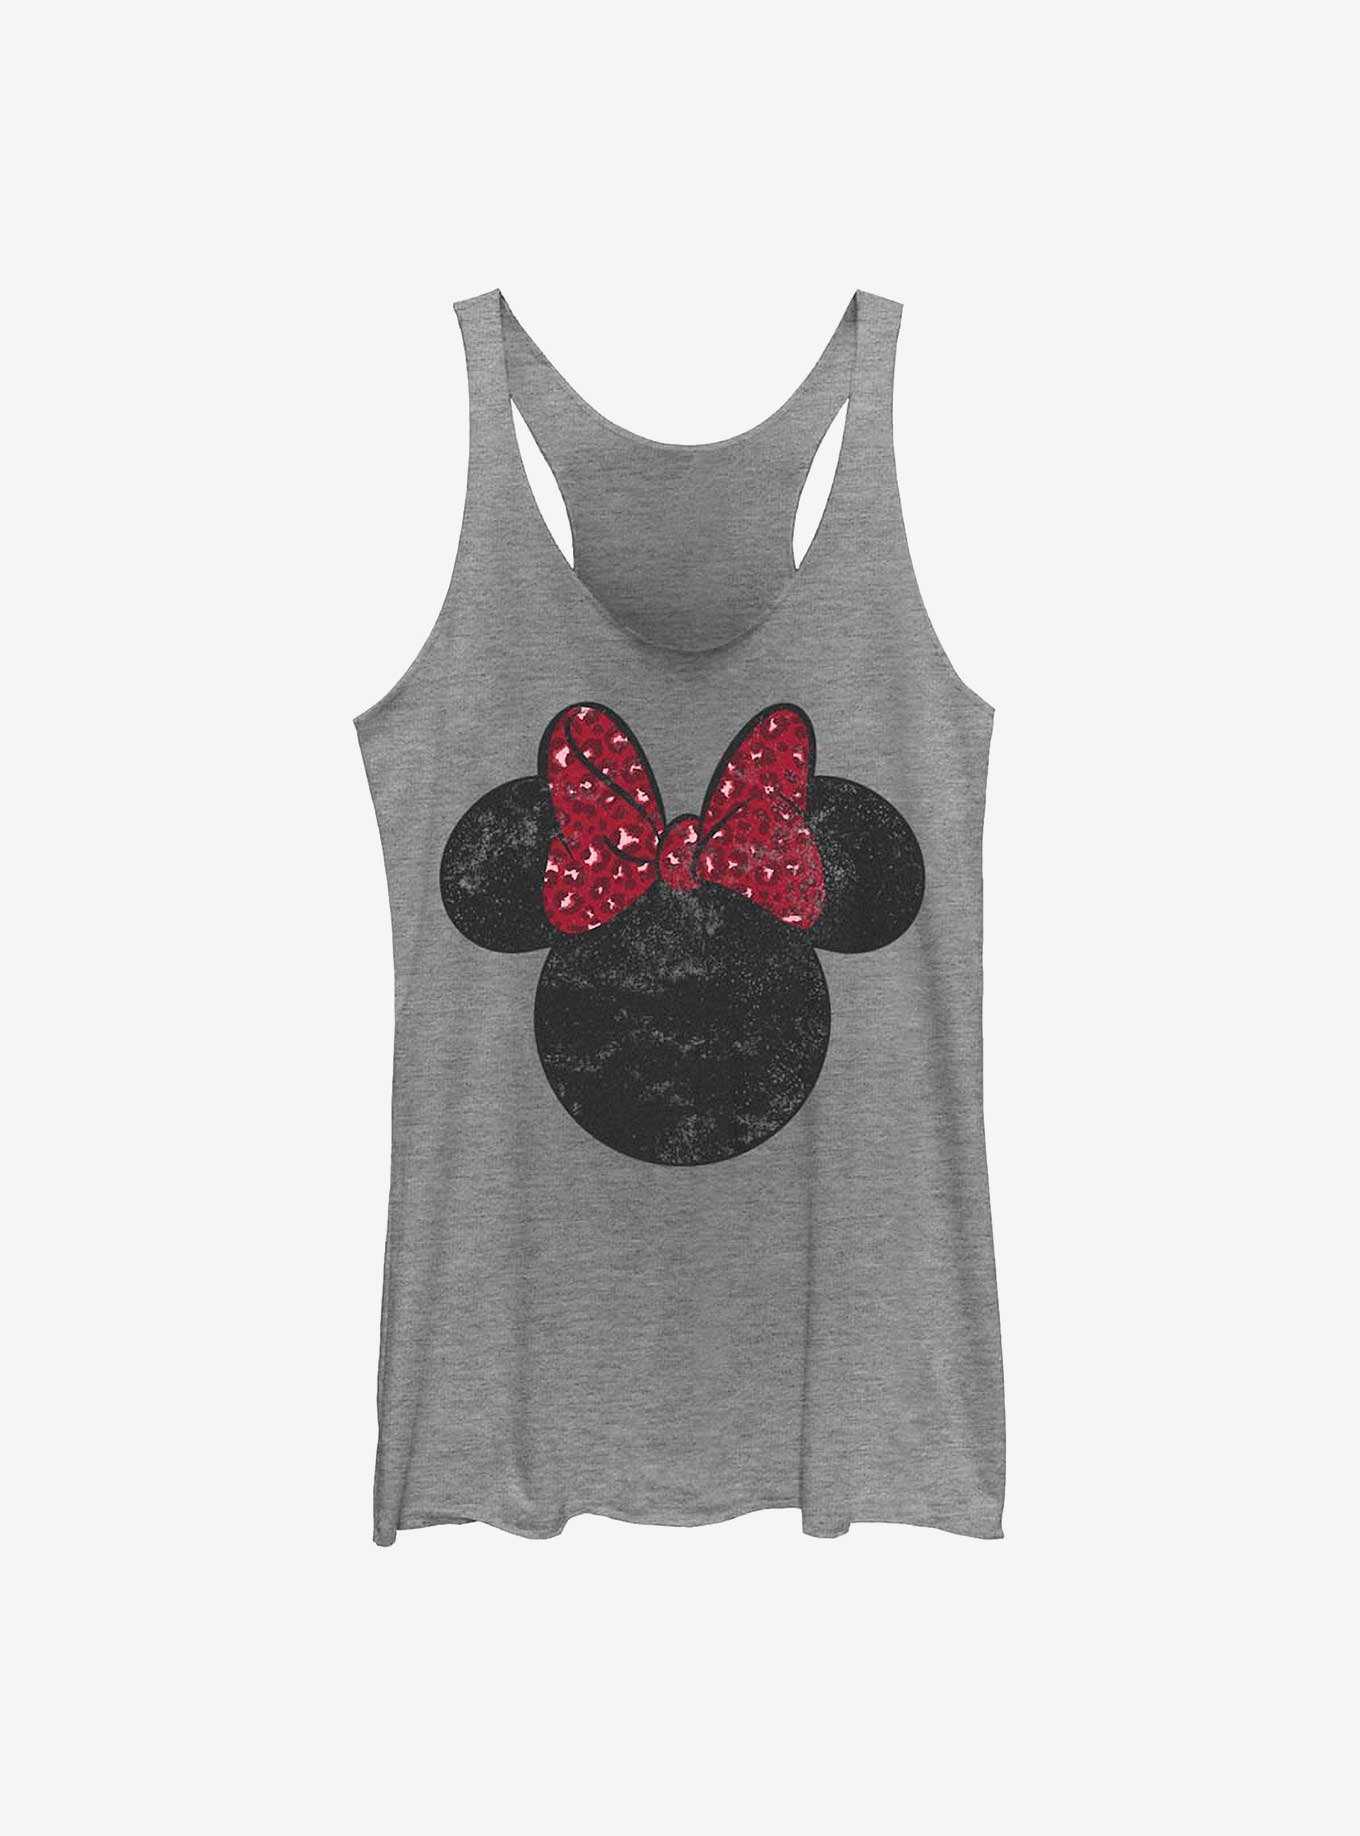 Disney Minnie Mouse Tank Top Gray Black Pink Bow Graphic Print